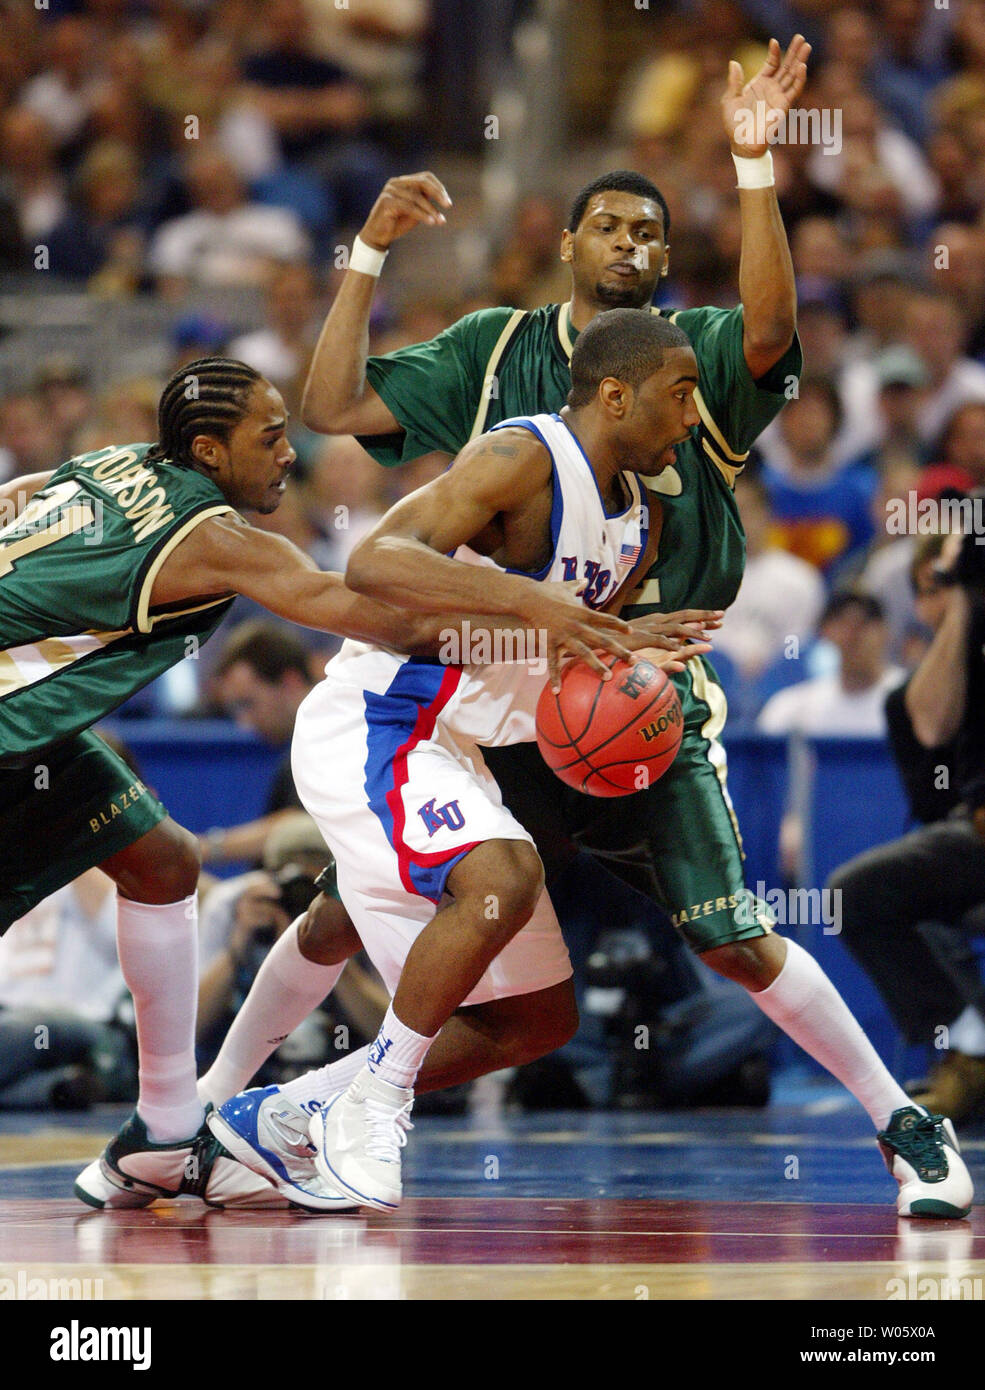 Alabama- Birmingham's Tony Johnson (L) gets a hand on the basketball, knocking it away from Kansas' Kieth Langford as UAB's Sidney Ball defends during their NCAA Regional game at the Edward Jones Dome in St. Louis on March 26, 2004.   (UPI Photo/Bill Greenblatt) Stock Photo